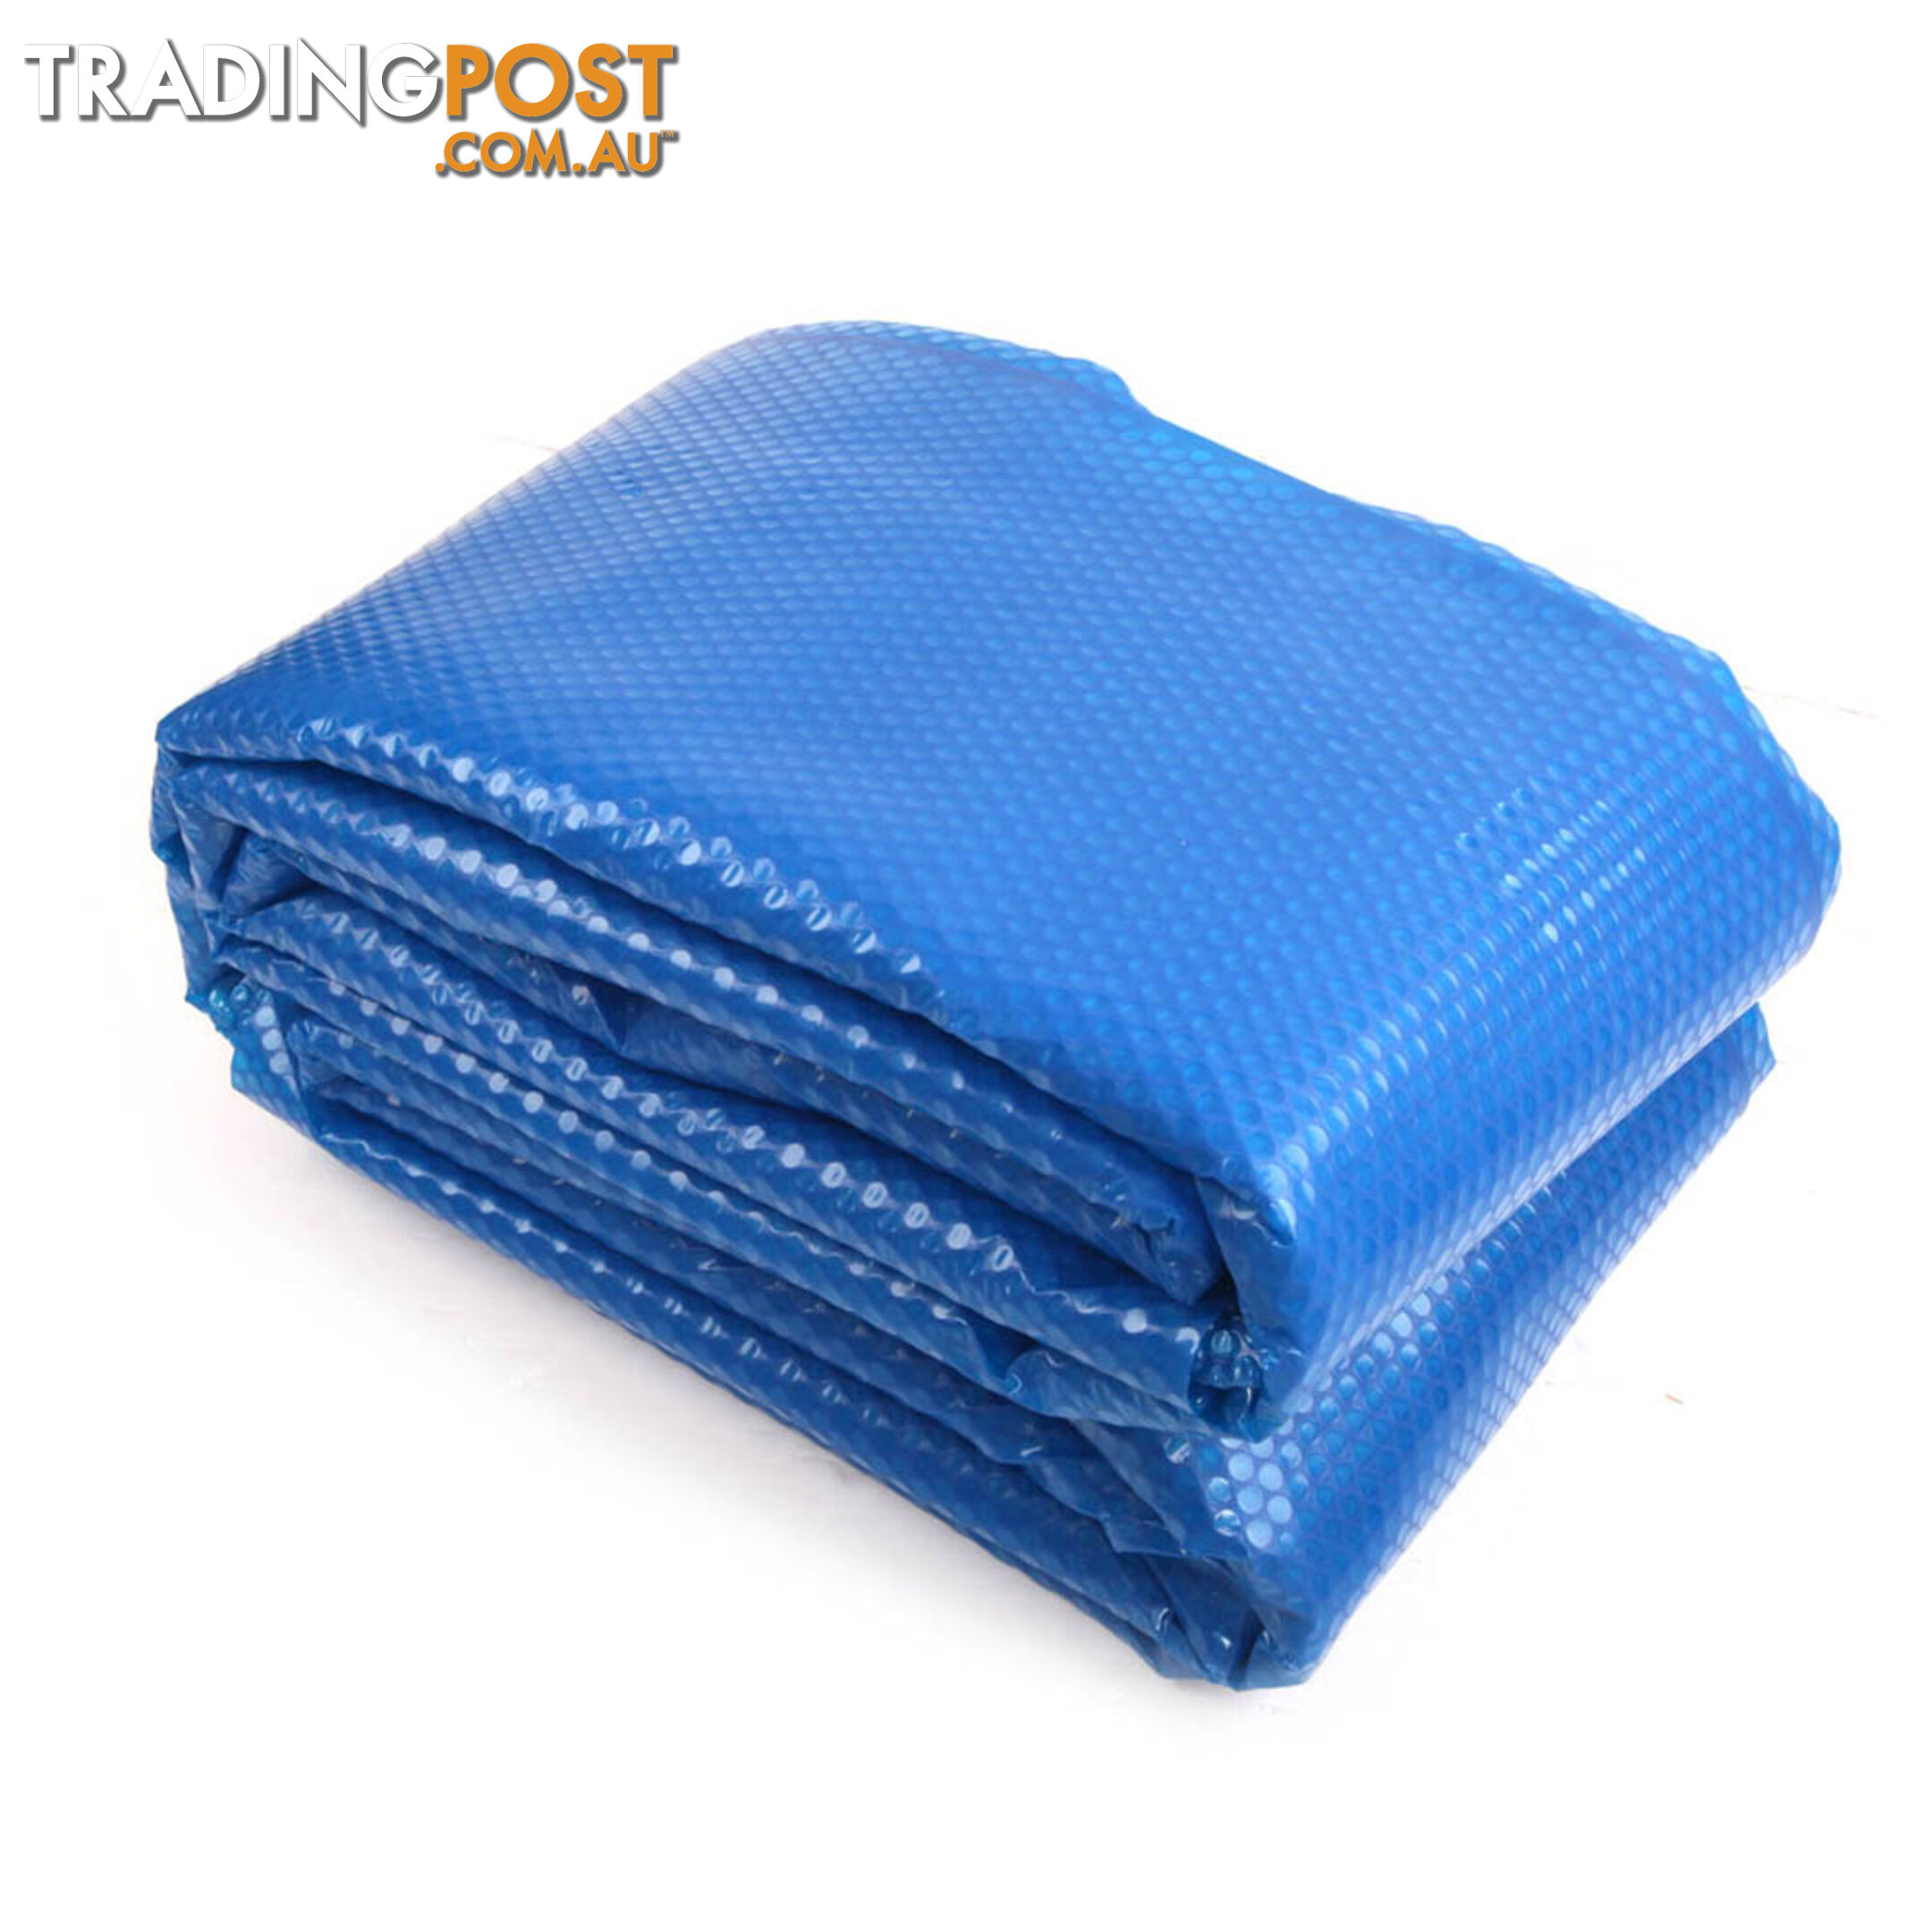 8m X 4.2m Outdoor Solar Swimming Pool Cover Winter 400 Micron Bubble Blanket